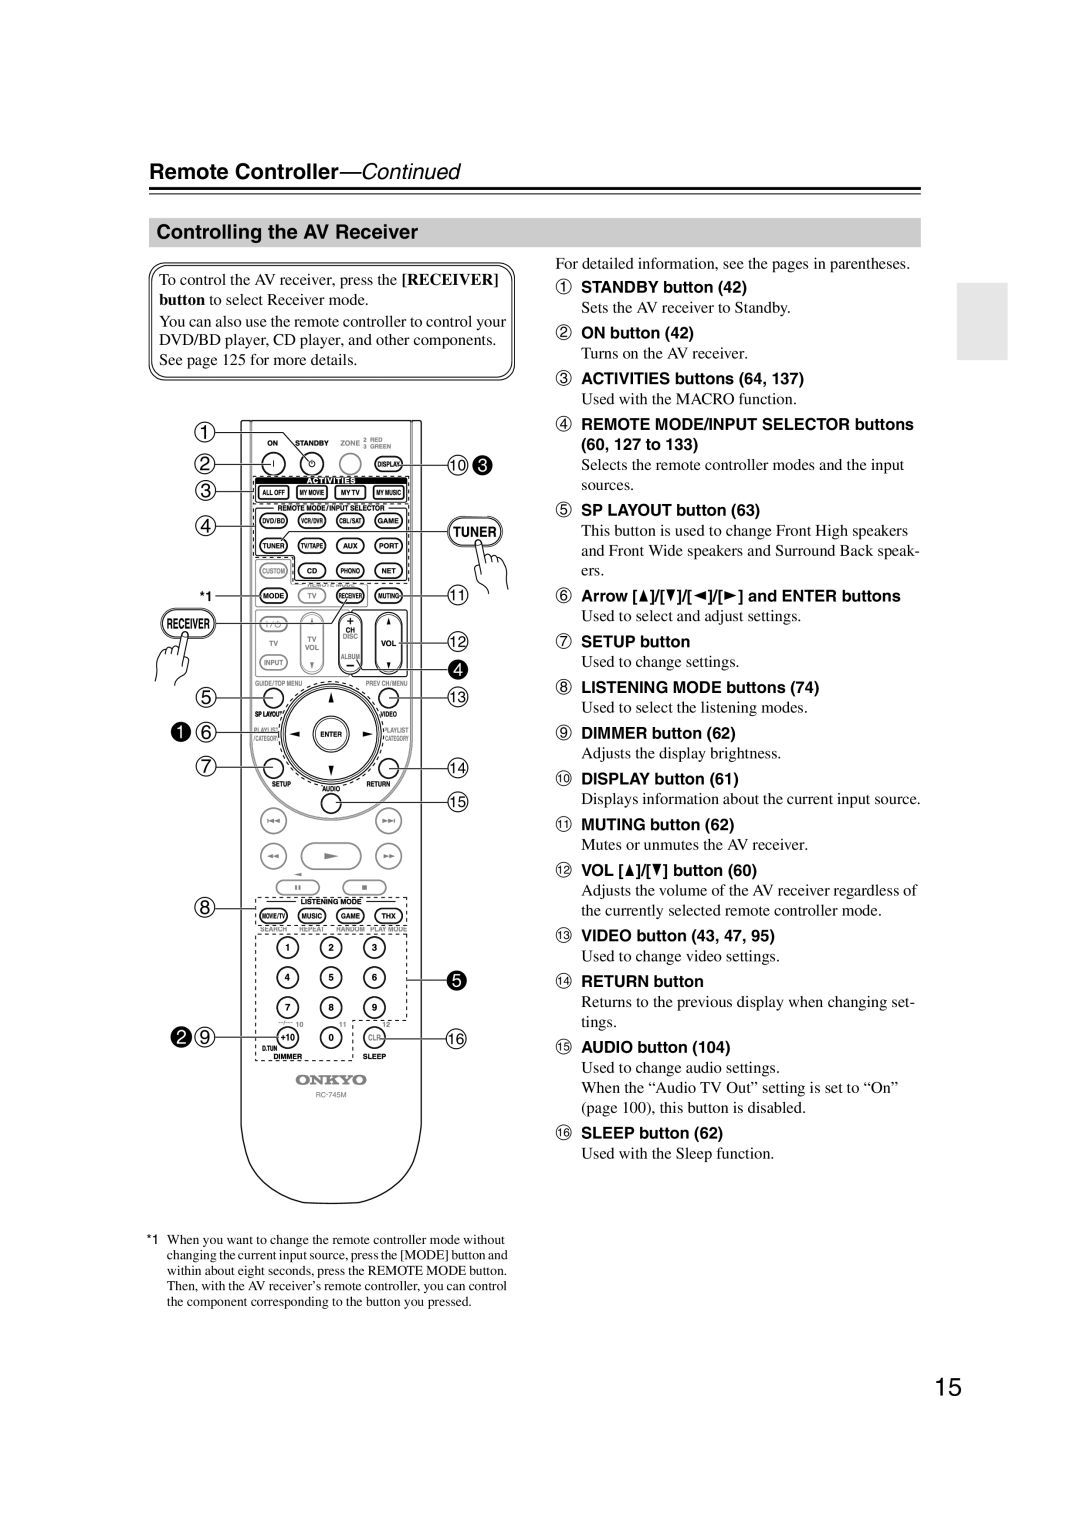 Onkyo 29400021, HT-RC180, TX-NR807 instruction manual Remote Controller—Continued 